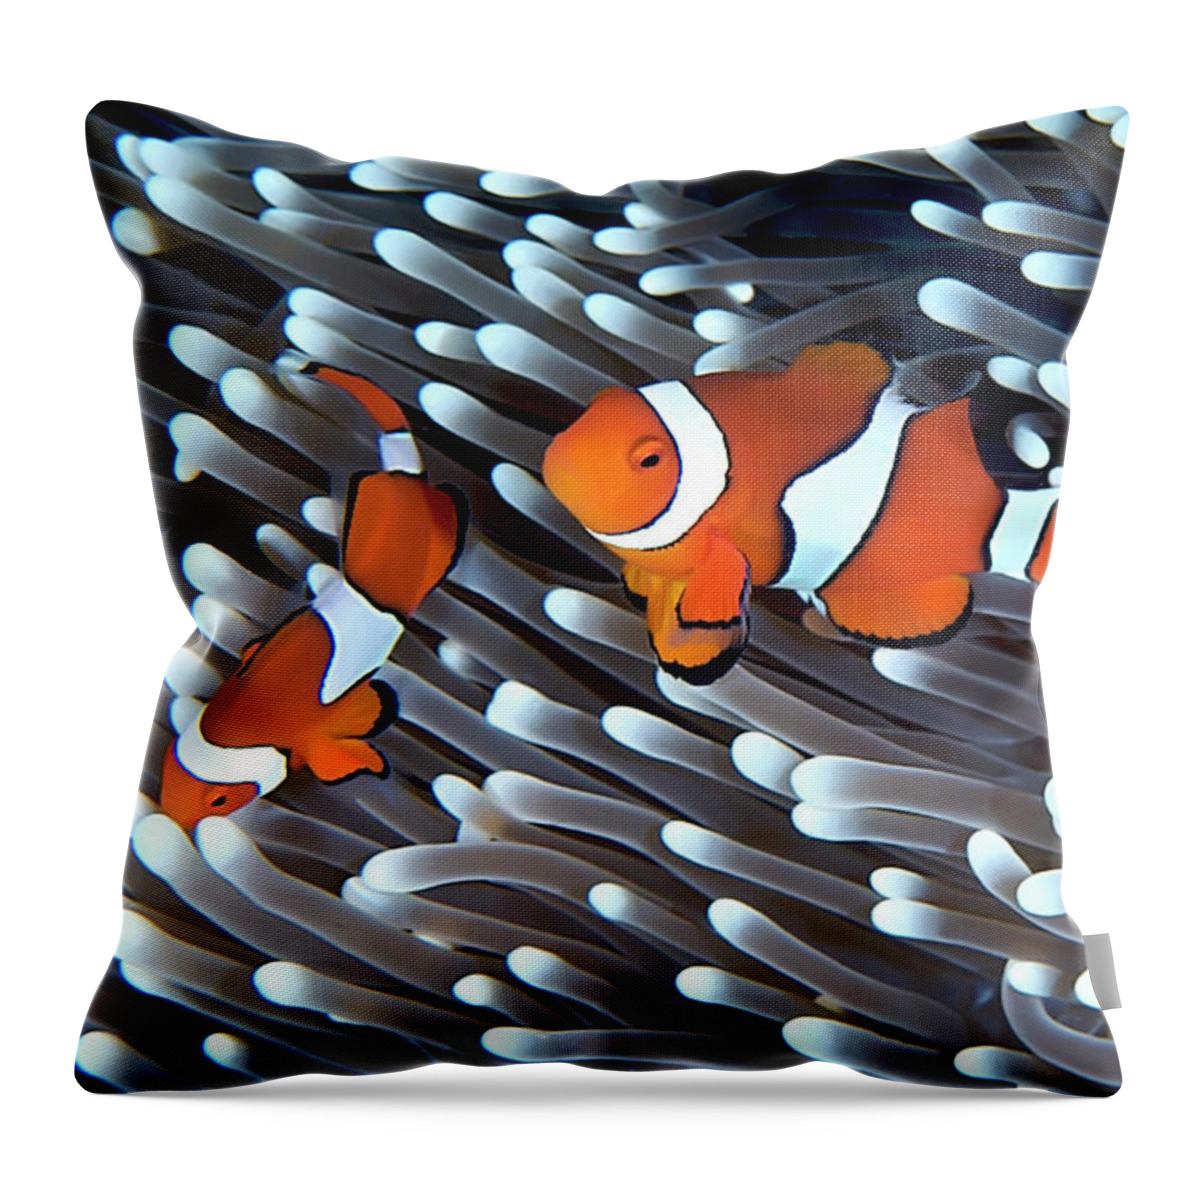 Underwater Throw Pillow featuring the photograph Clownfish by Copyright Melissa Fiene